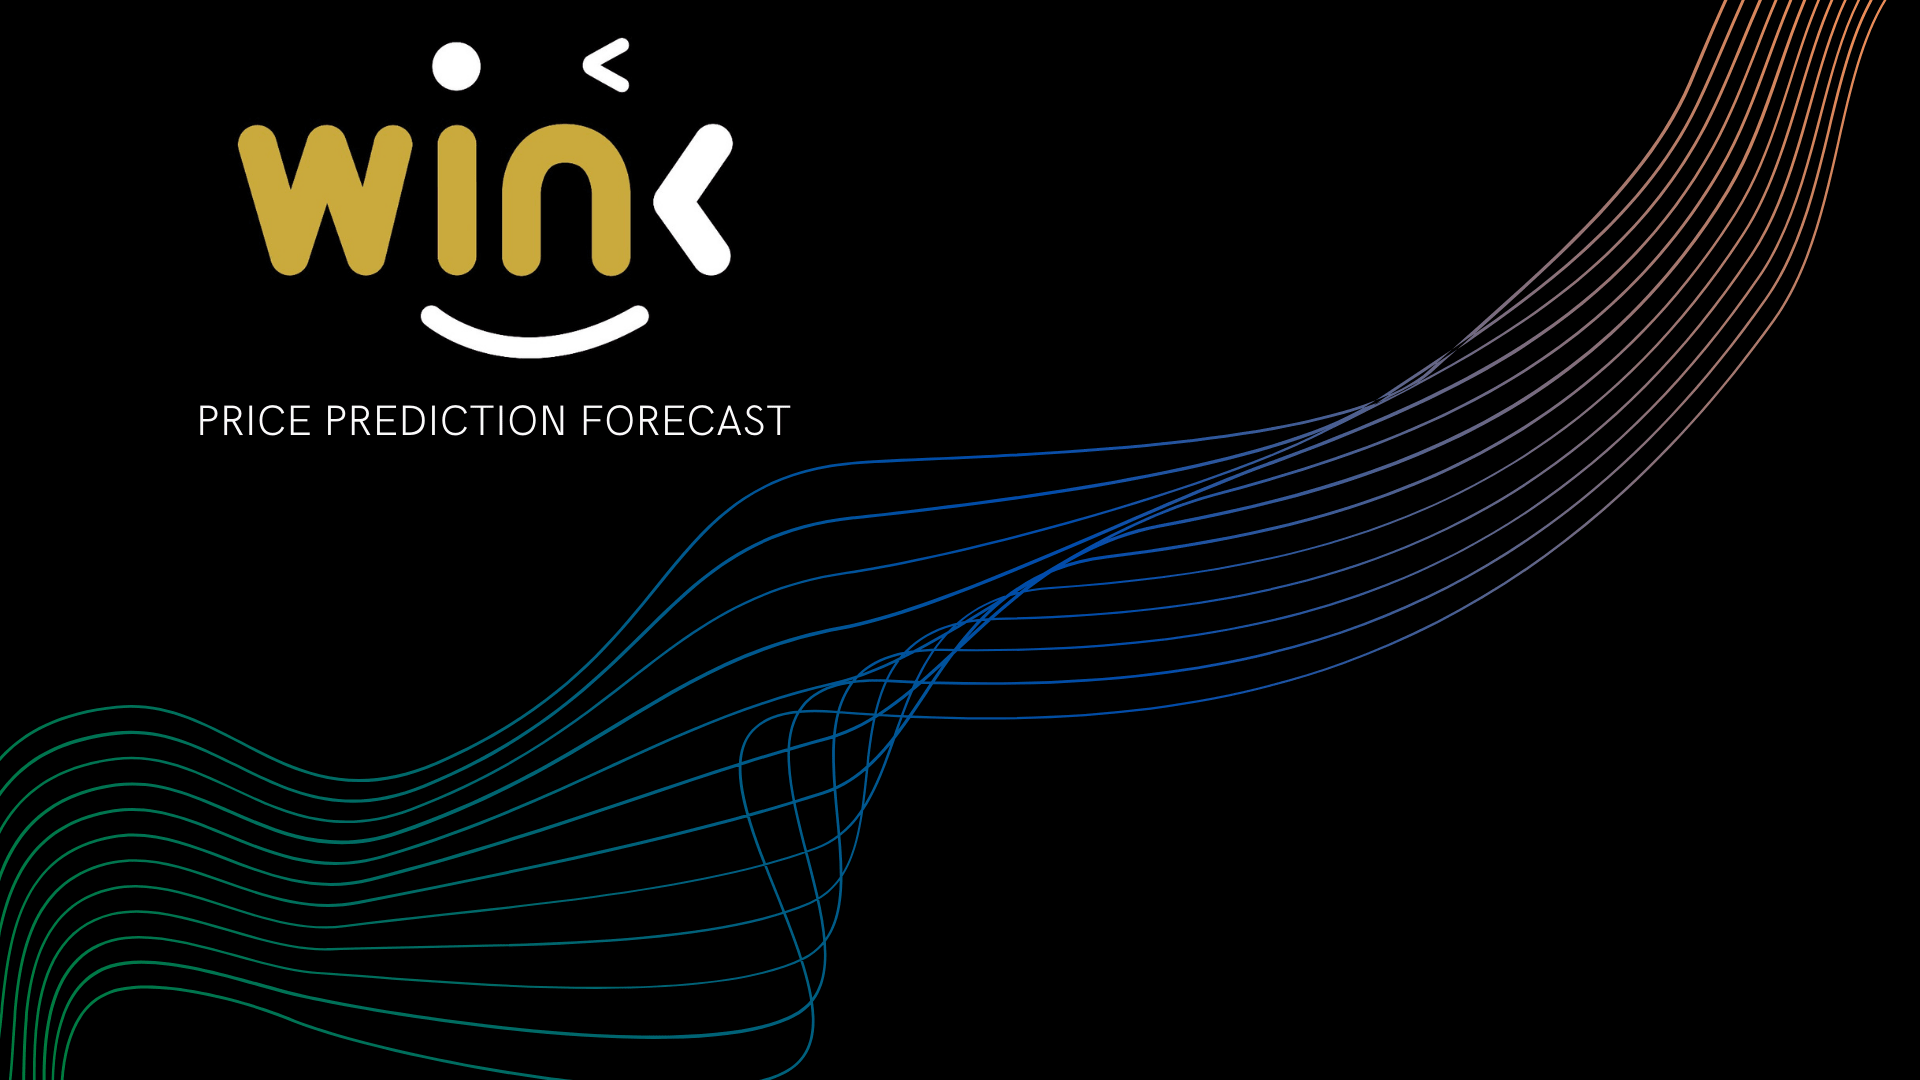 WINkLink (WIN) Price Prediction 2022, 2023, 2024, 2025, 2030, Exchange, Listing, Contact Address, FAQs